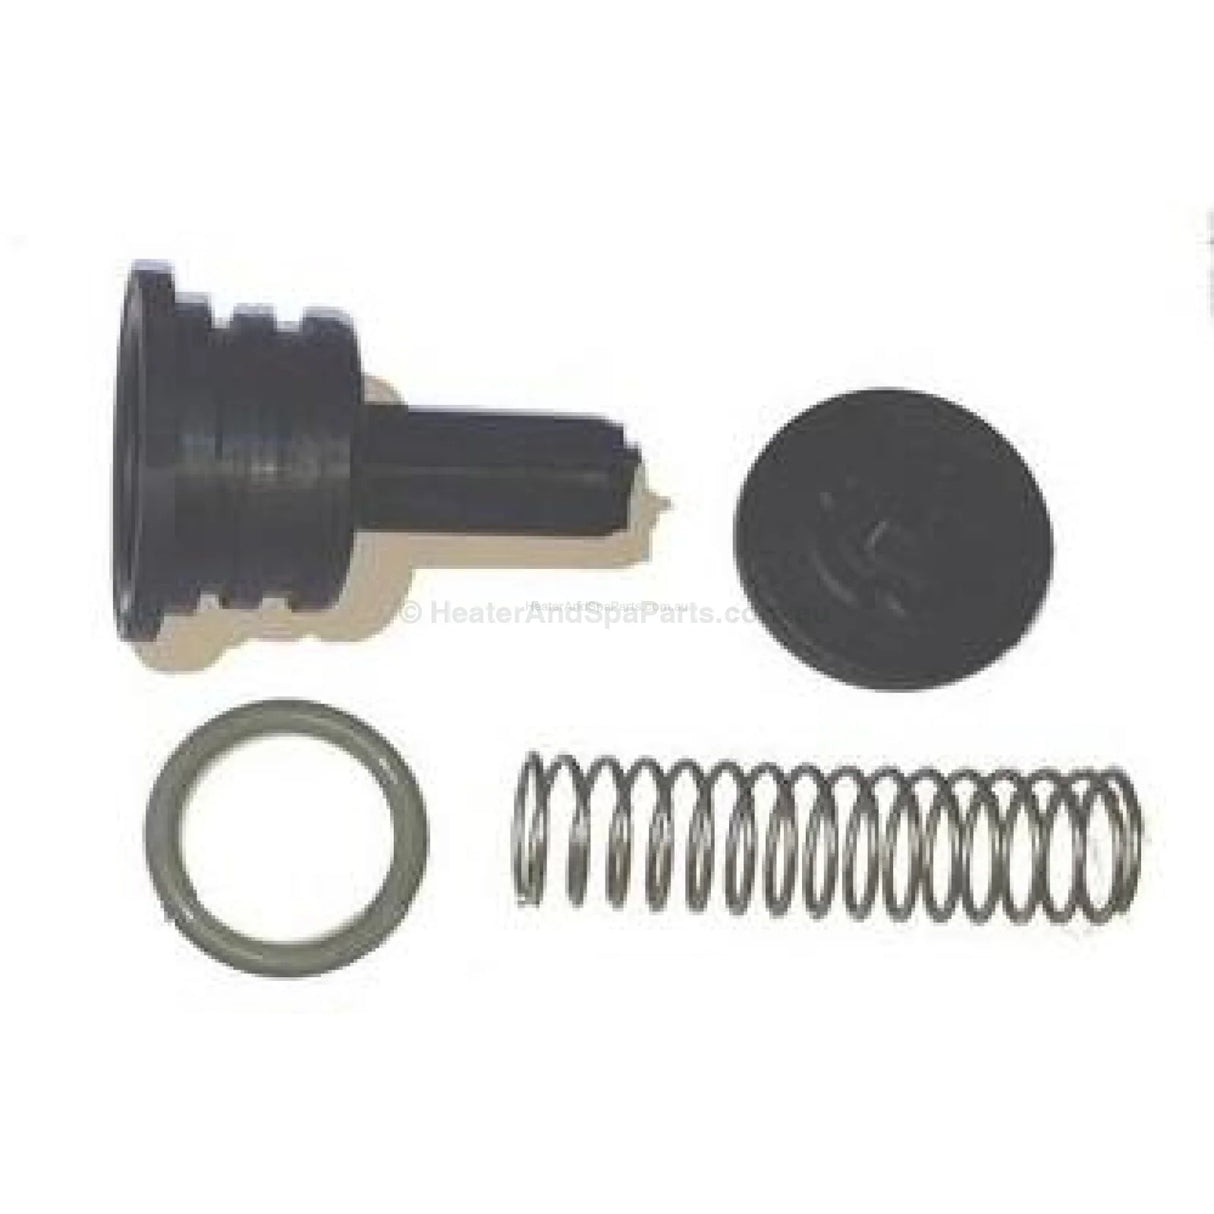 Hurlcon Astralpool Gas Heater Seal & Bypass Kits - MX 125 150 200 300 400 - Heater and Spa Parts